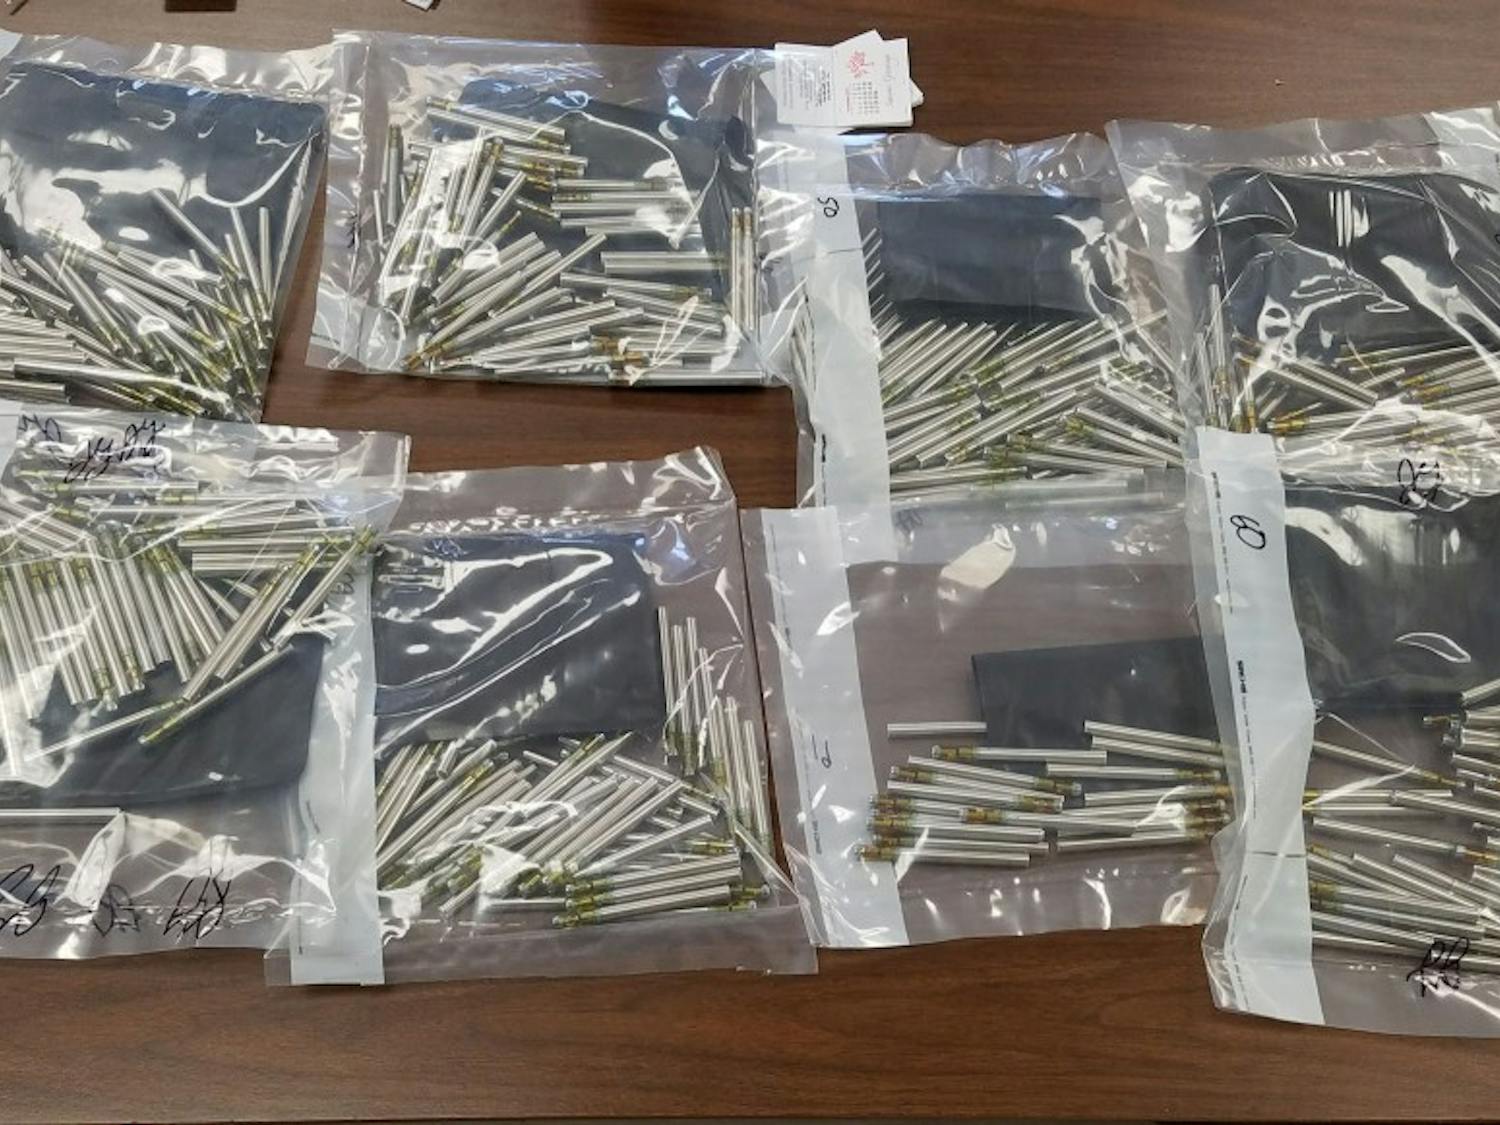 Vape pens filled with THC oil recovered by Auburn police on Jan. 3, 2018.